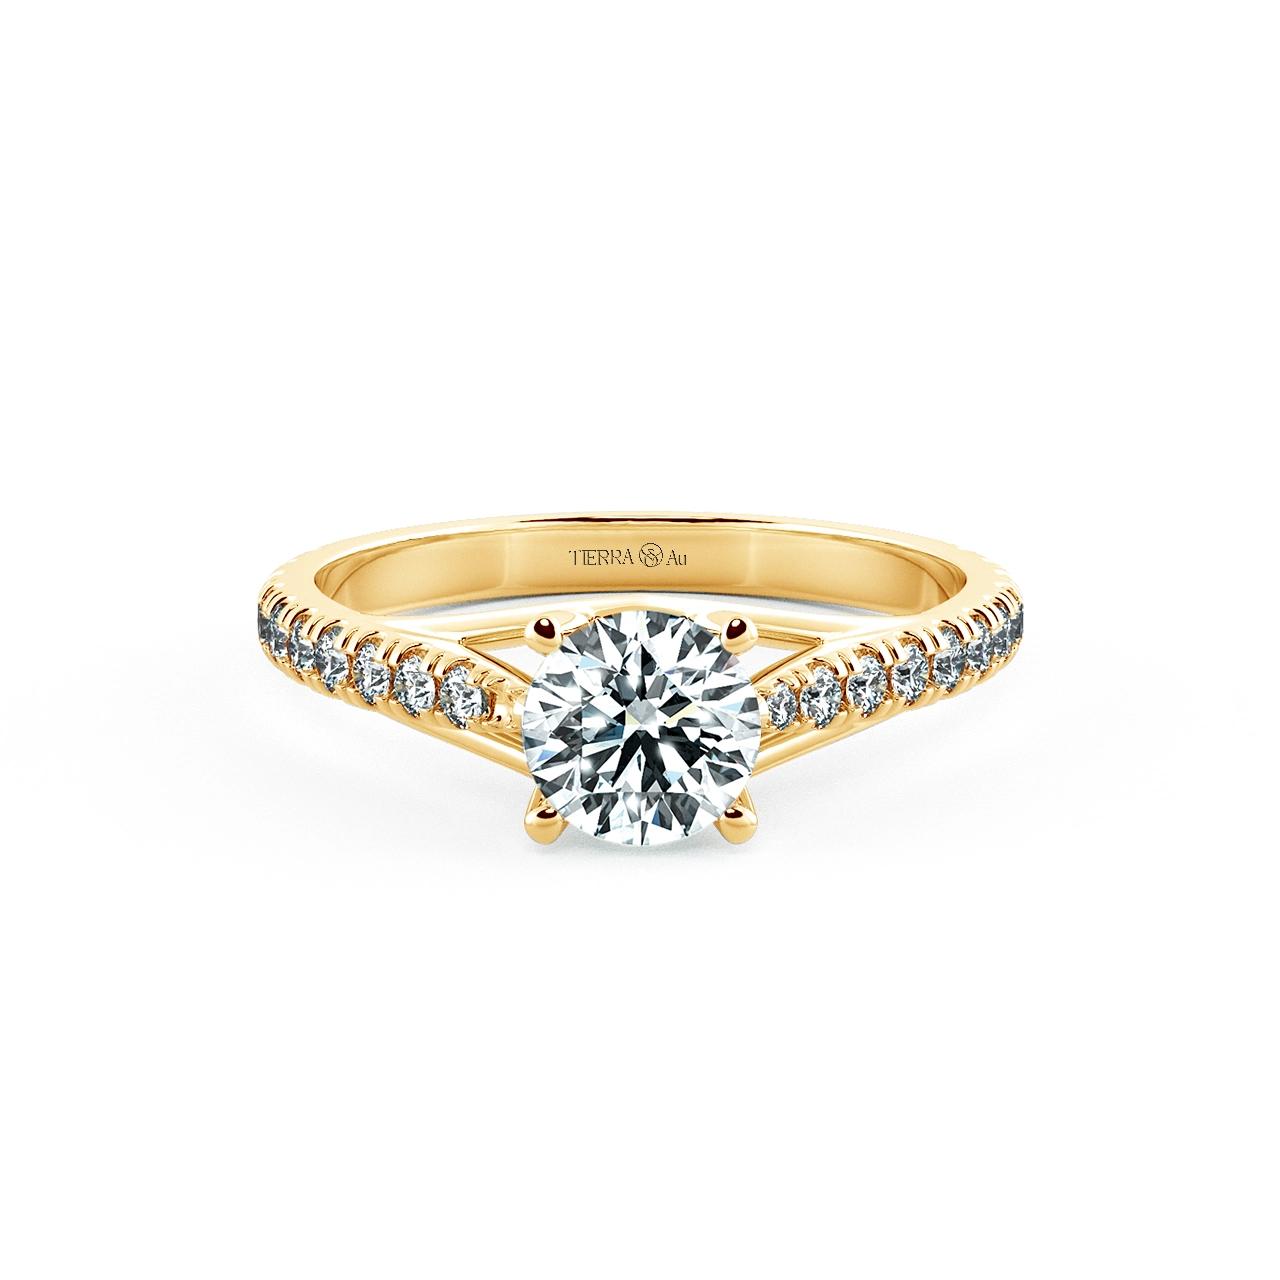 Four Prongs Trellis Engagement Ring with Pave Band and Stylized NCH1406 1